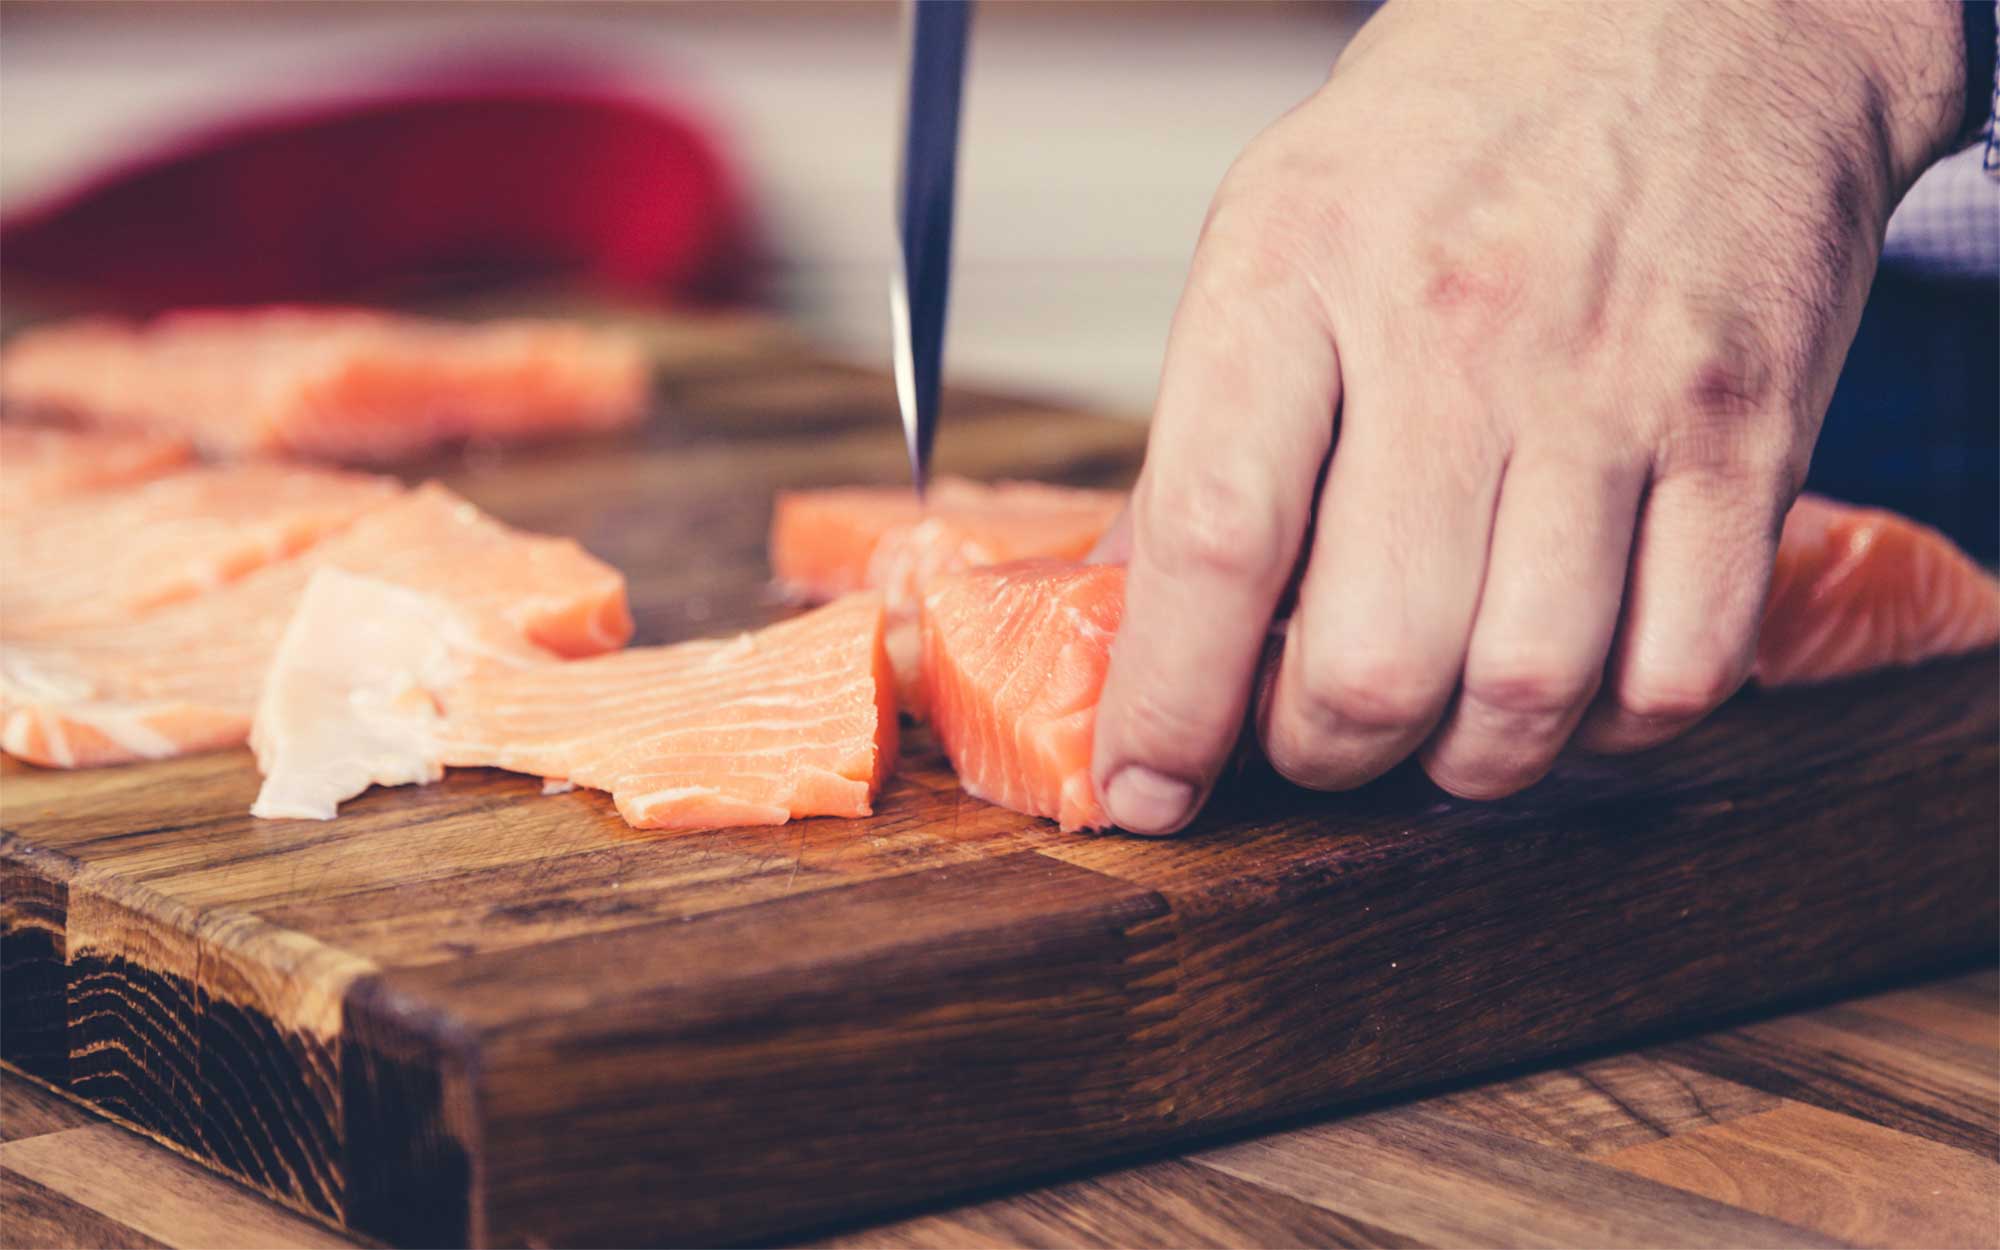 Man cutting salmon into pieces for home canning.